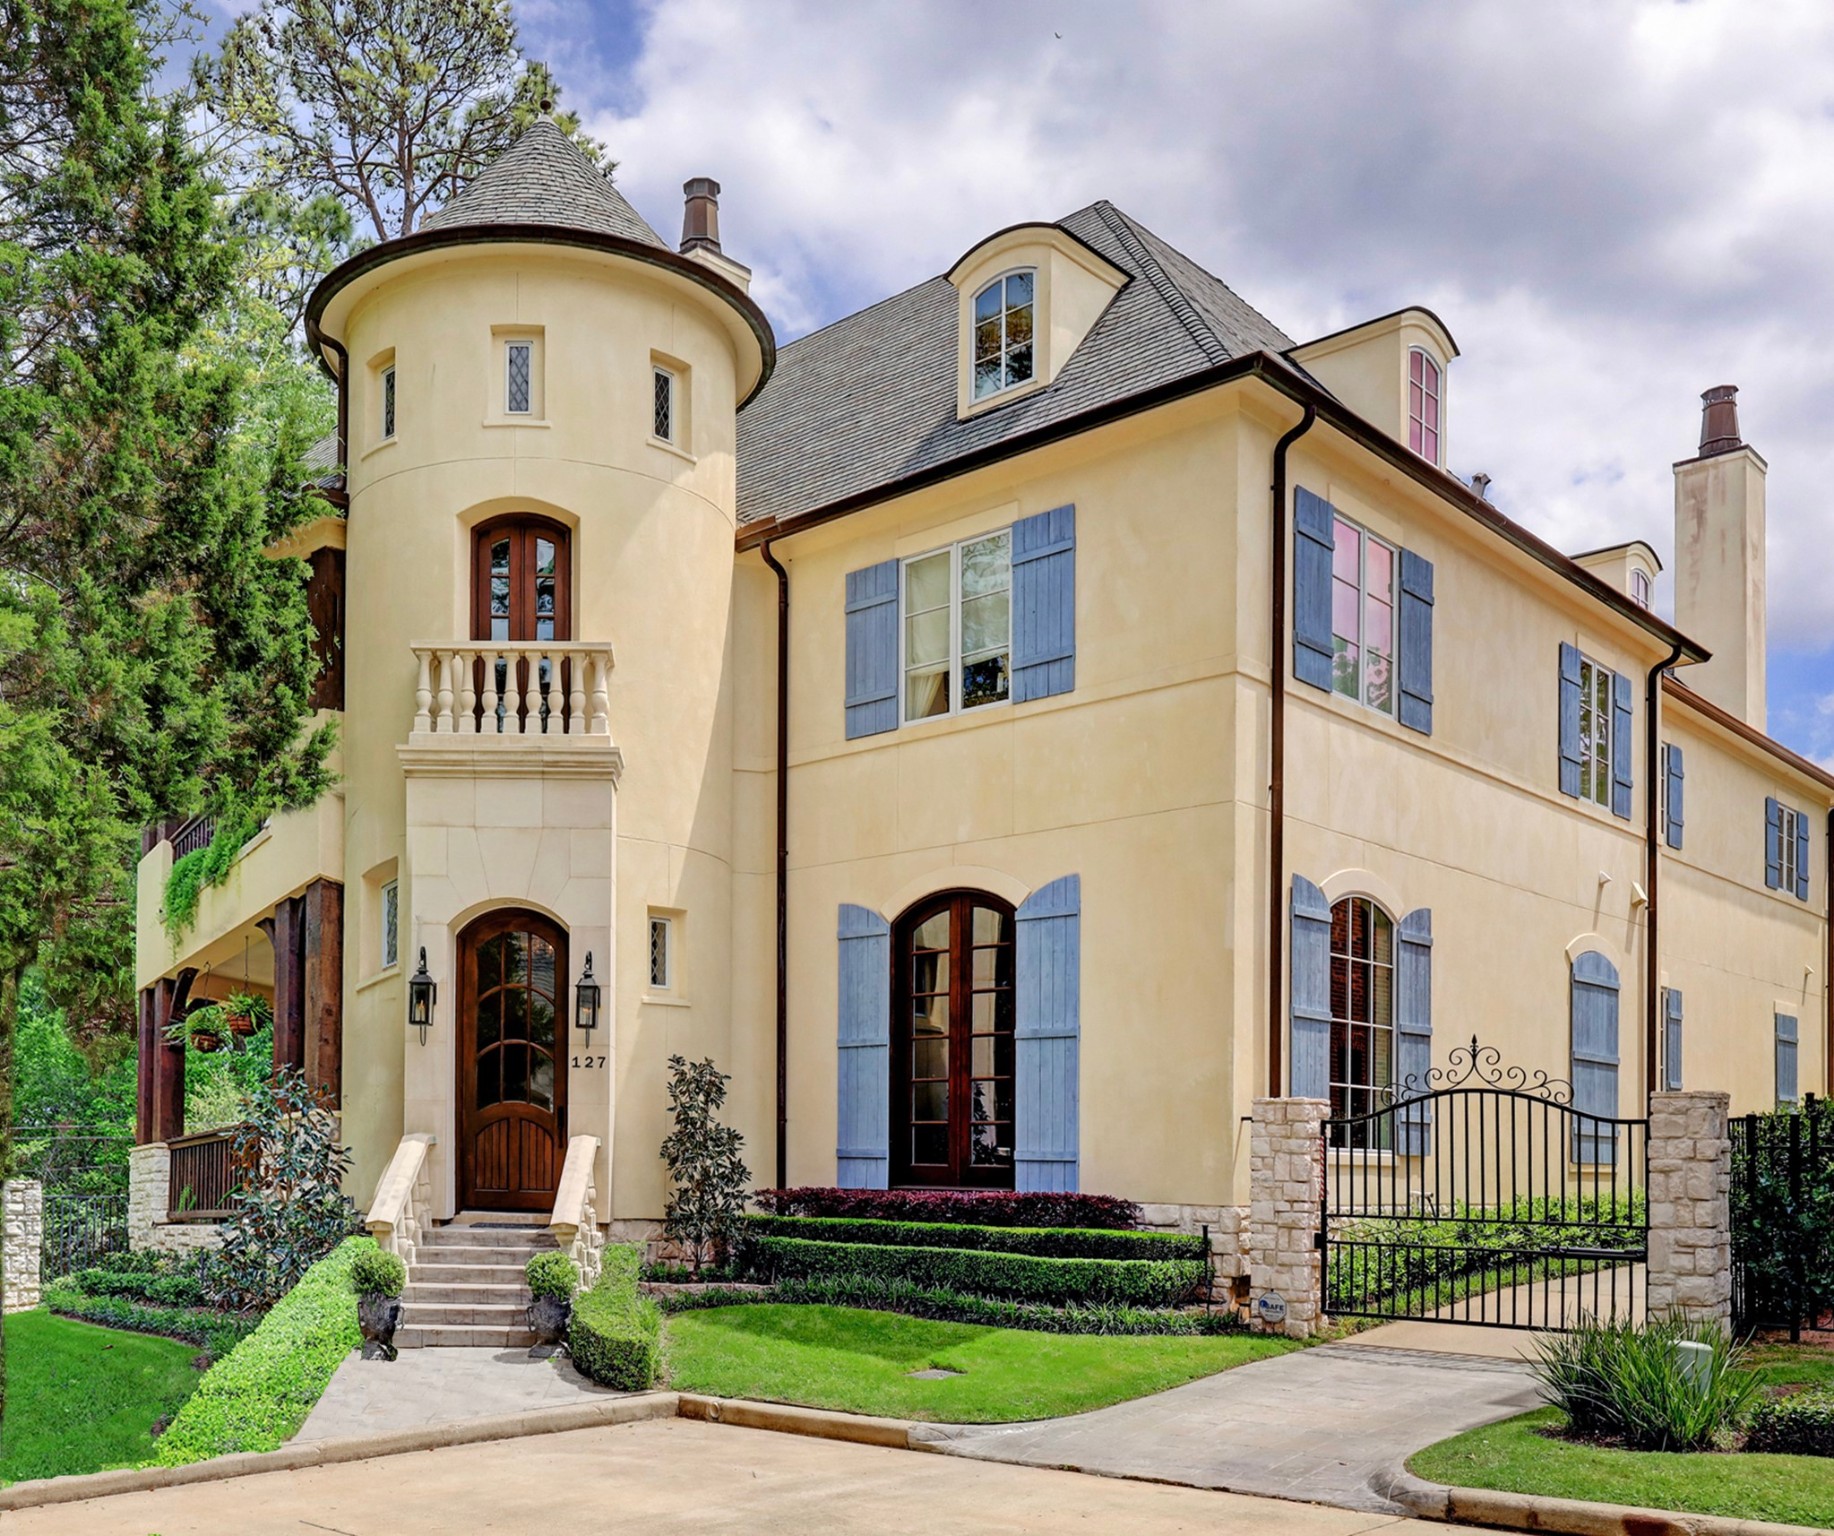 Iconic French Normandy architecture designed by Robert Dame on a charming gated street in Broad Oaks. Featuring 4 bedroom, 5 full baths, and 1 half bath.